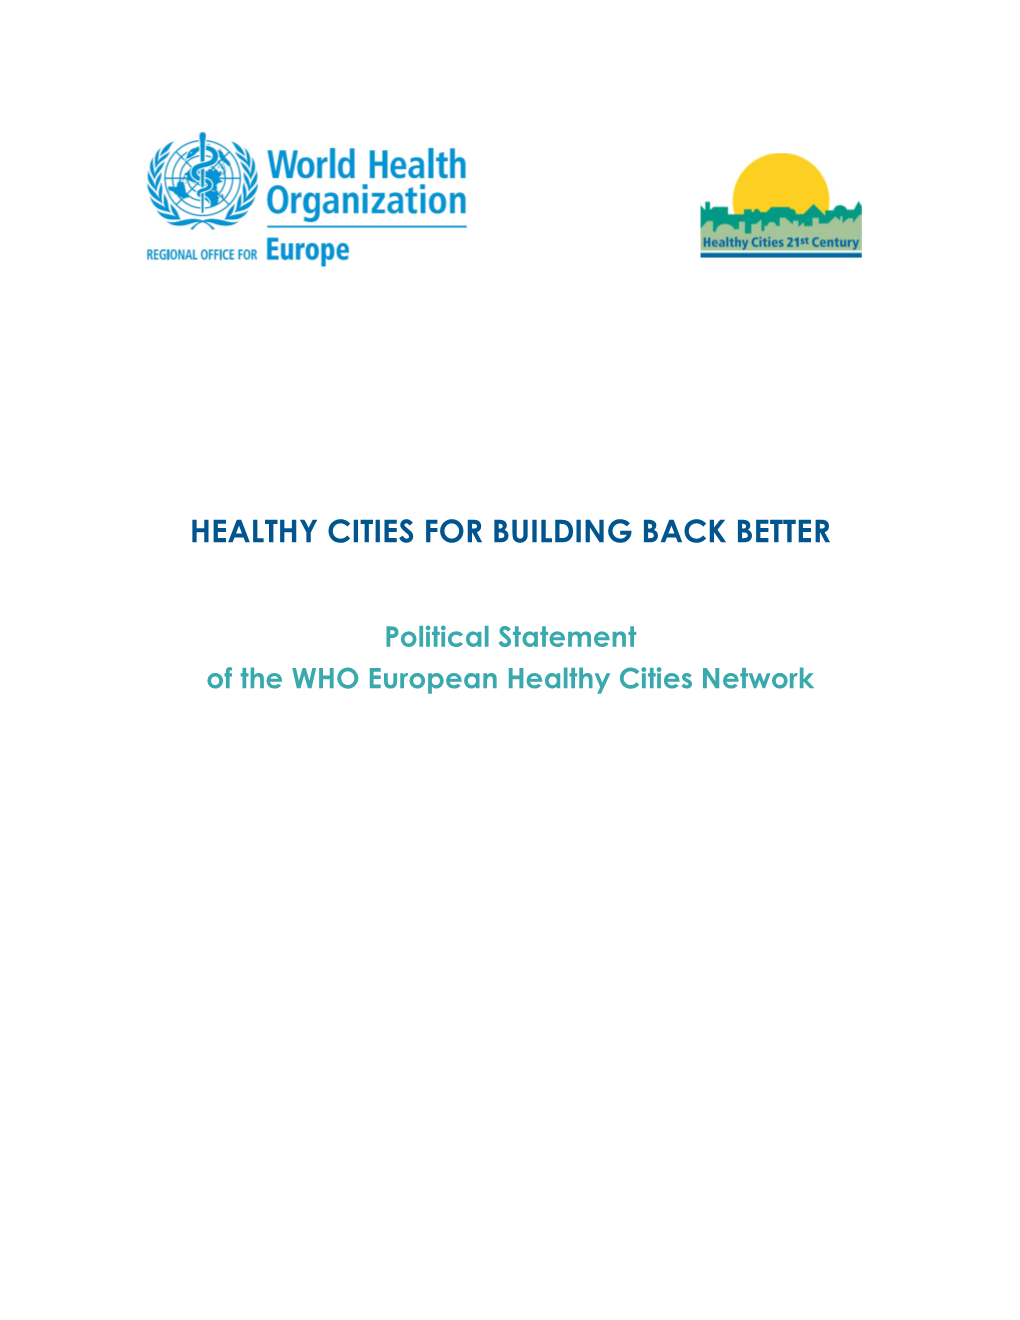 Healthy Cities for Building Back Better